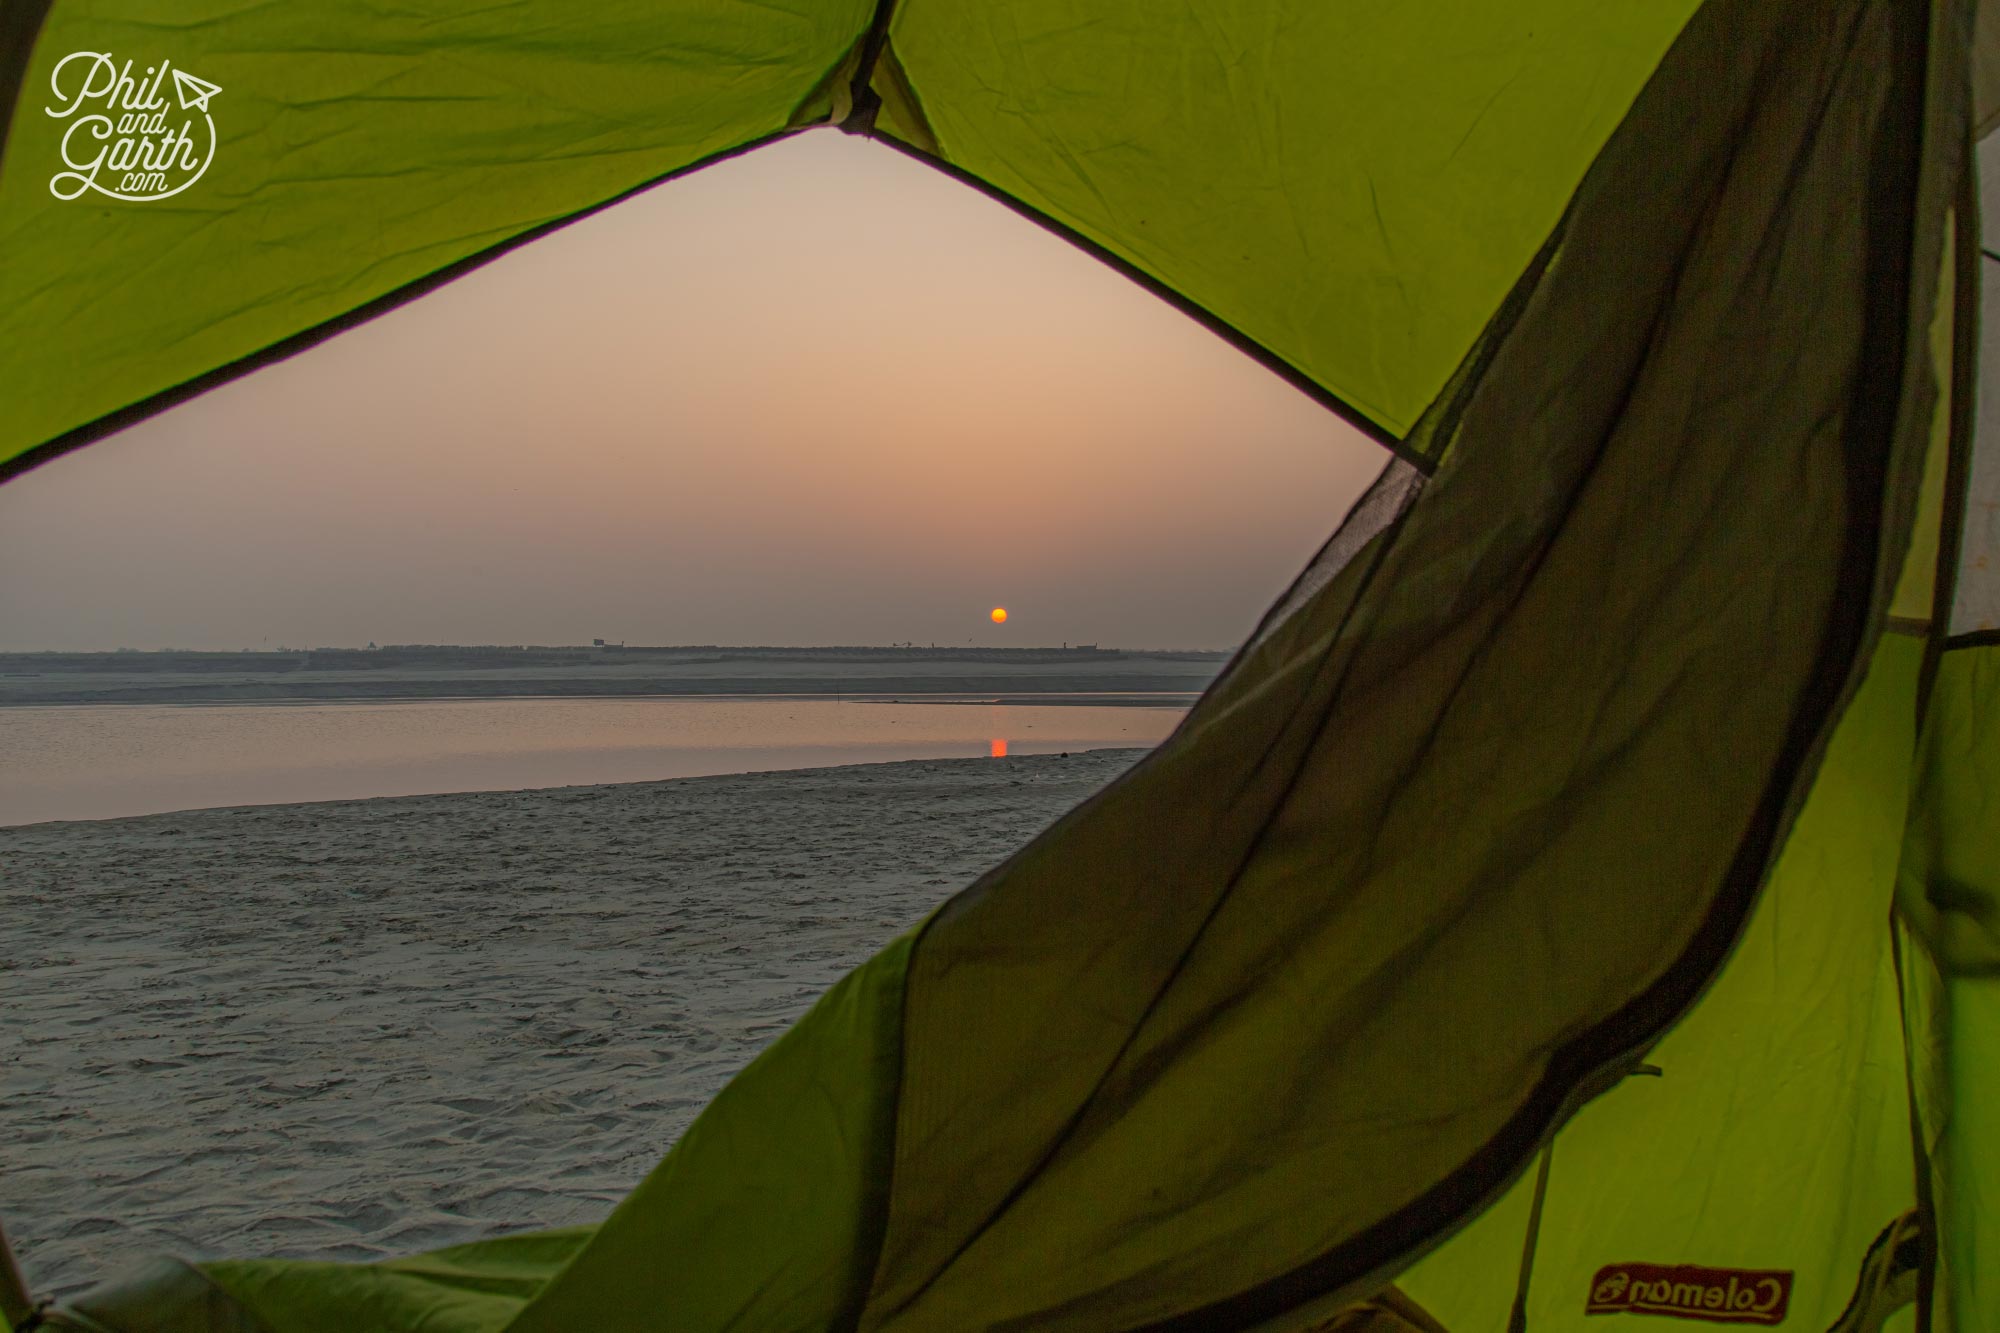 Magical moment watching the sunrise over the River Ganges from our tent